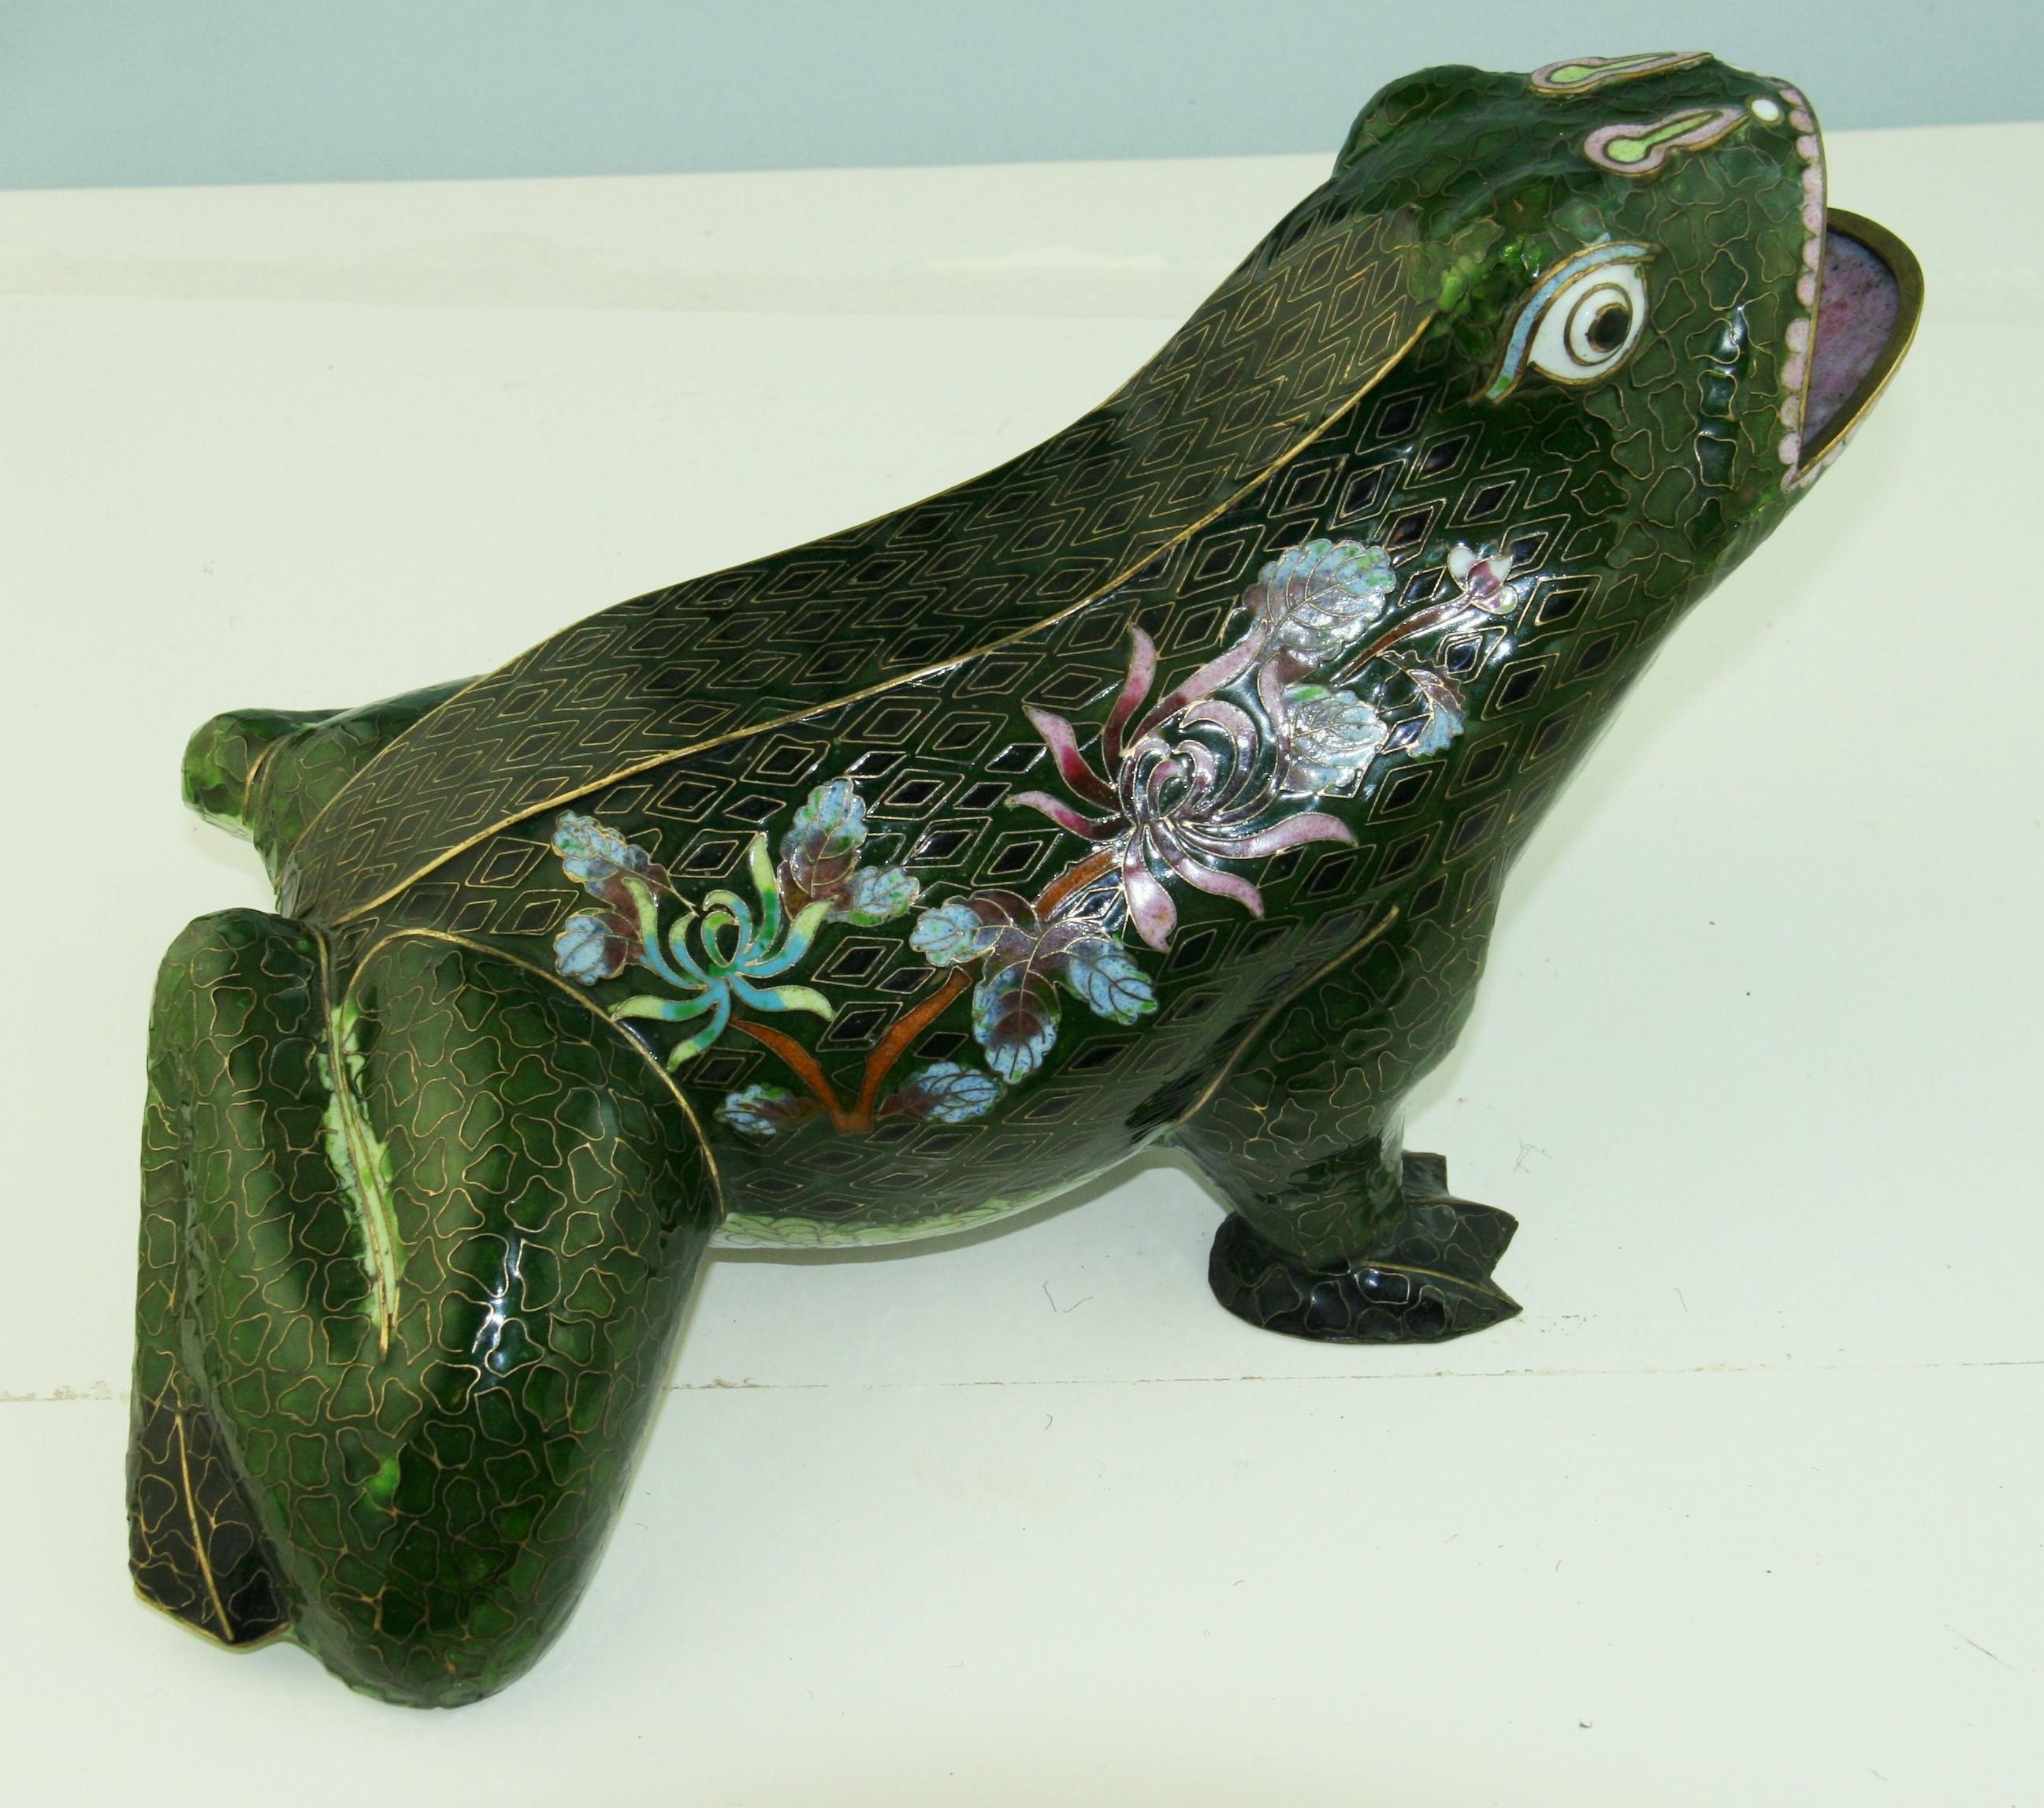 Japanese  Cloisonne oversized hand made brass and enamel frog sculpture.